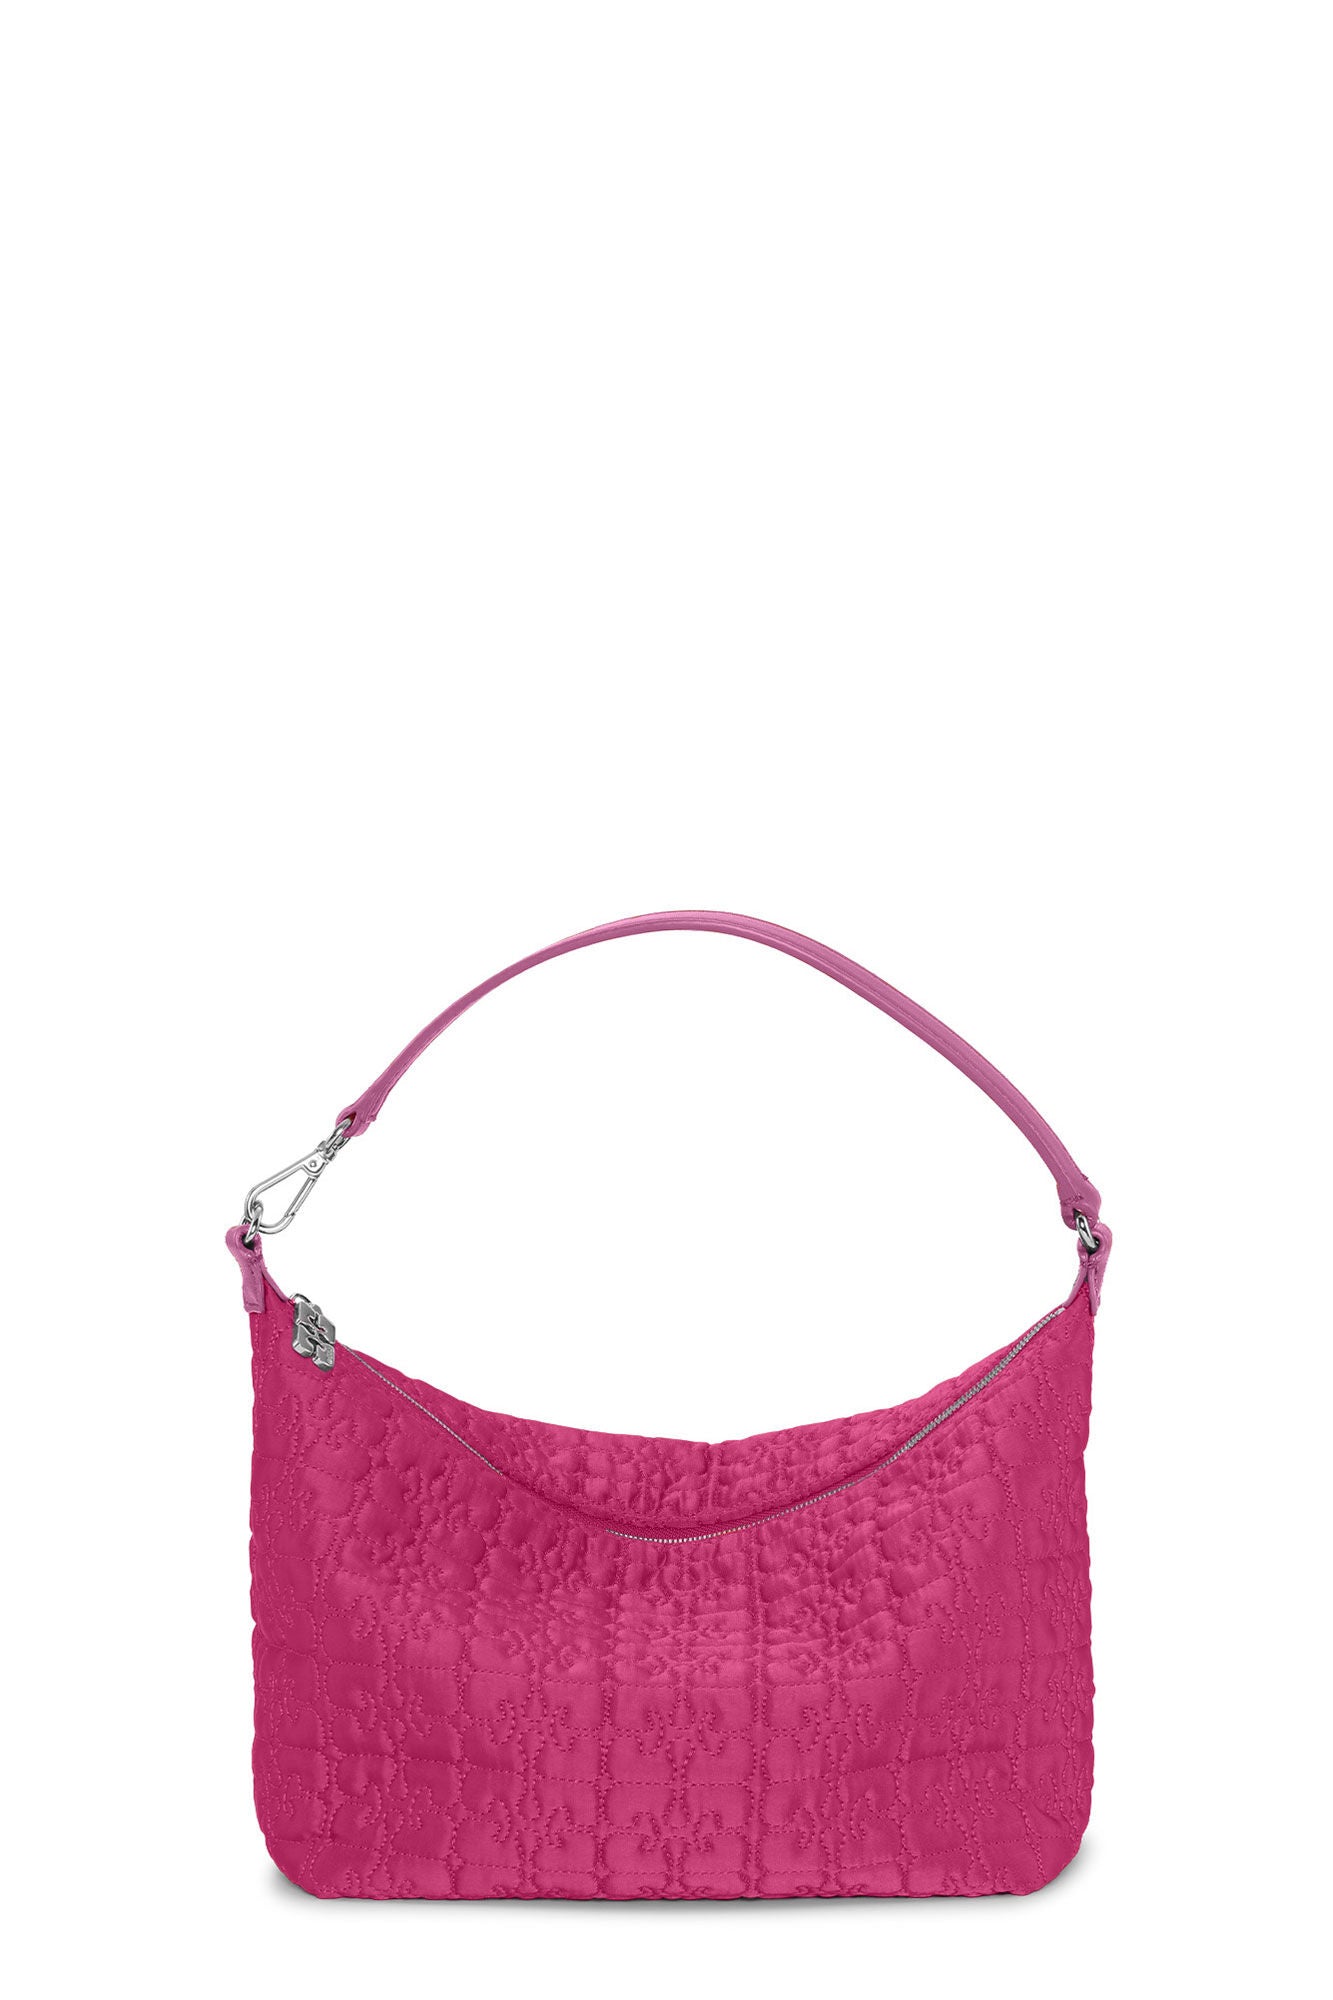 Ganni Butterfly Medium Pouch in Shocking Pink Satin – Leigh's of